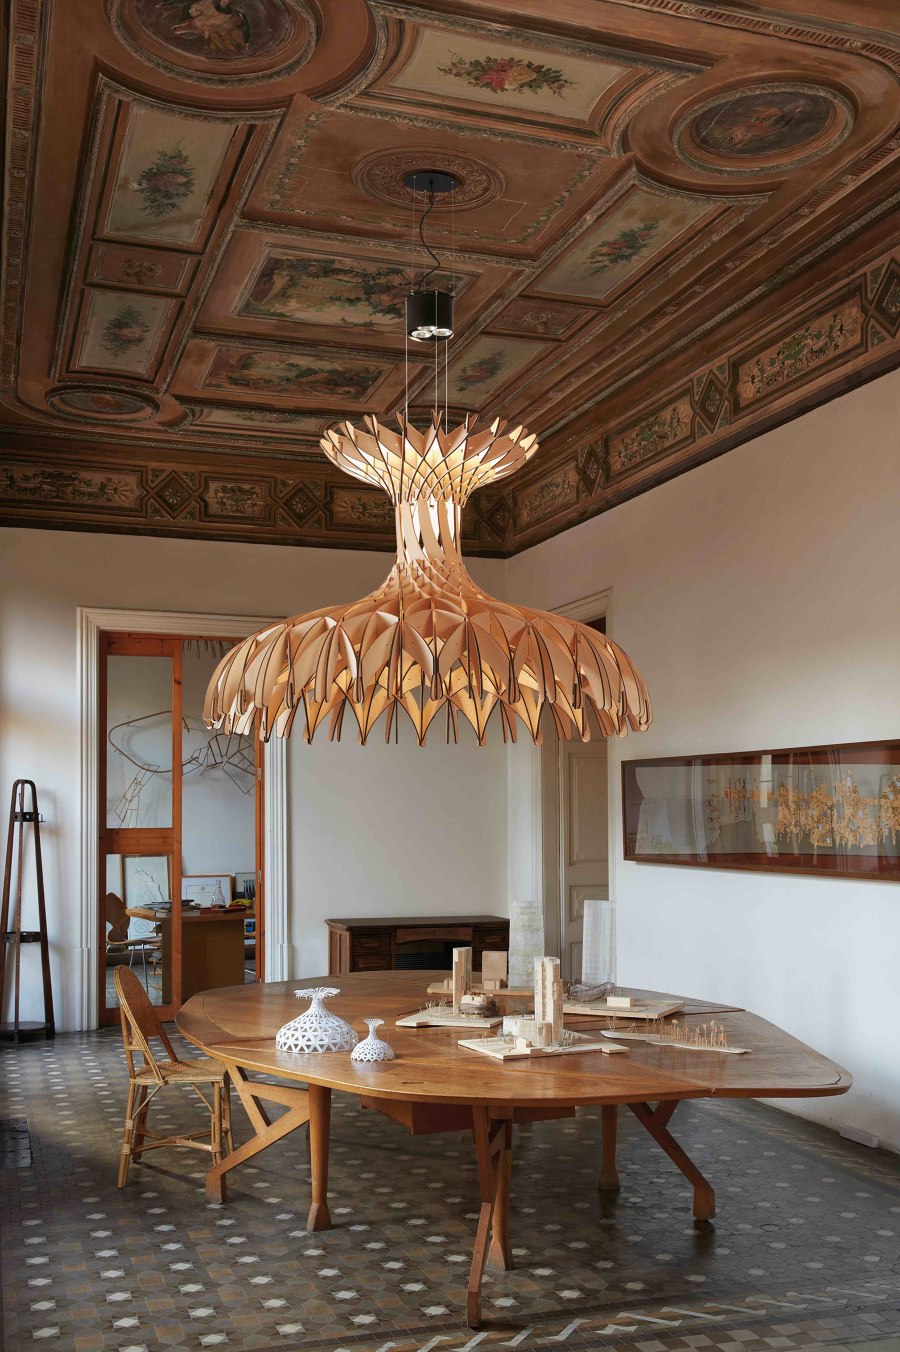 25 years of Mediterranean light from Bover | Nouveautés